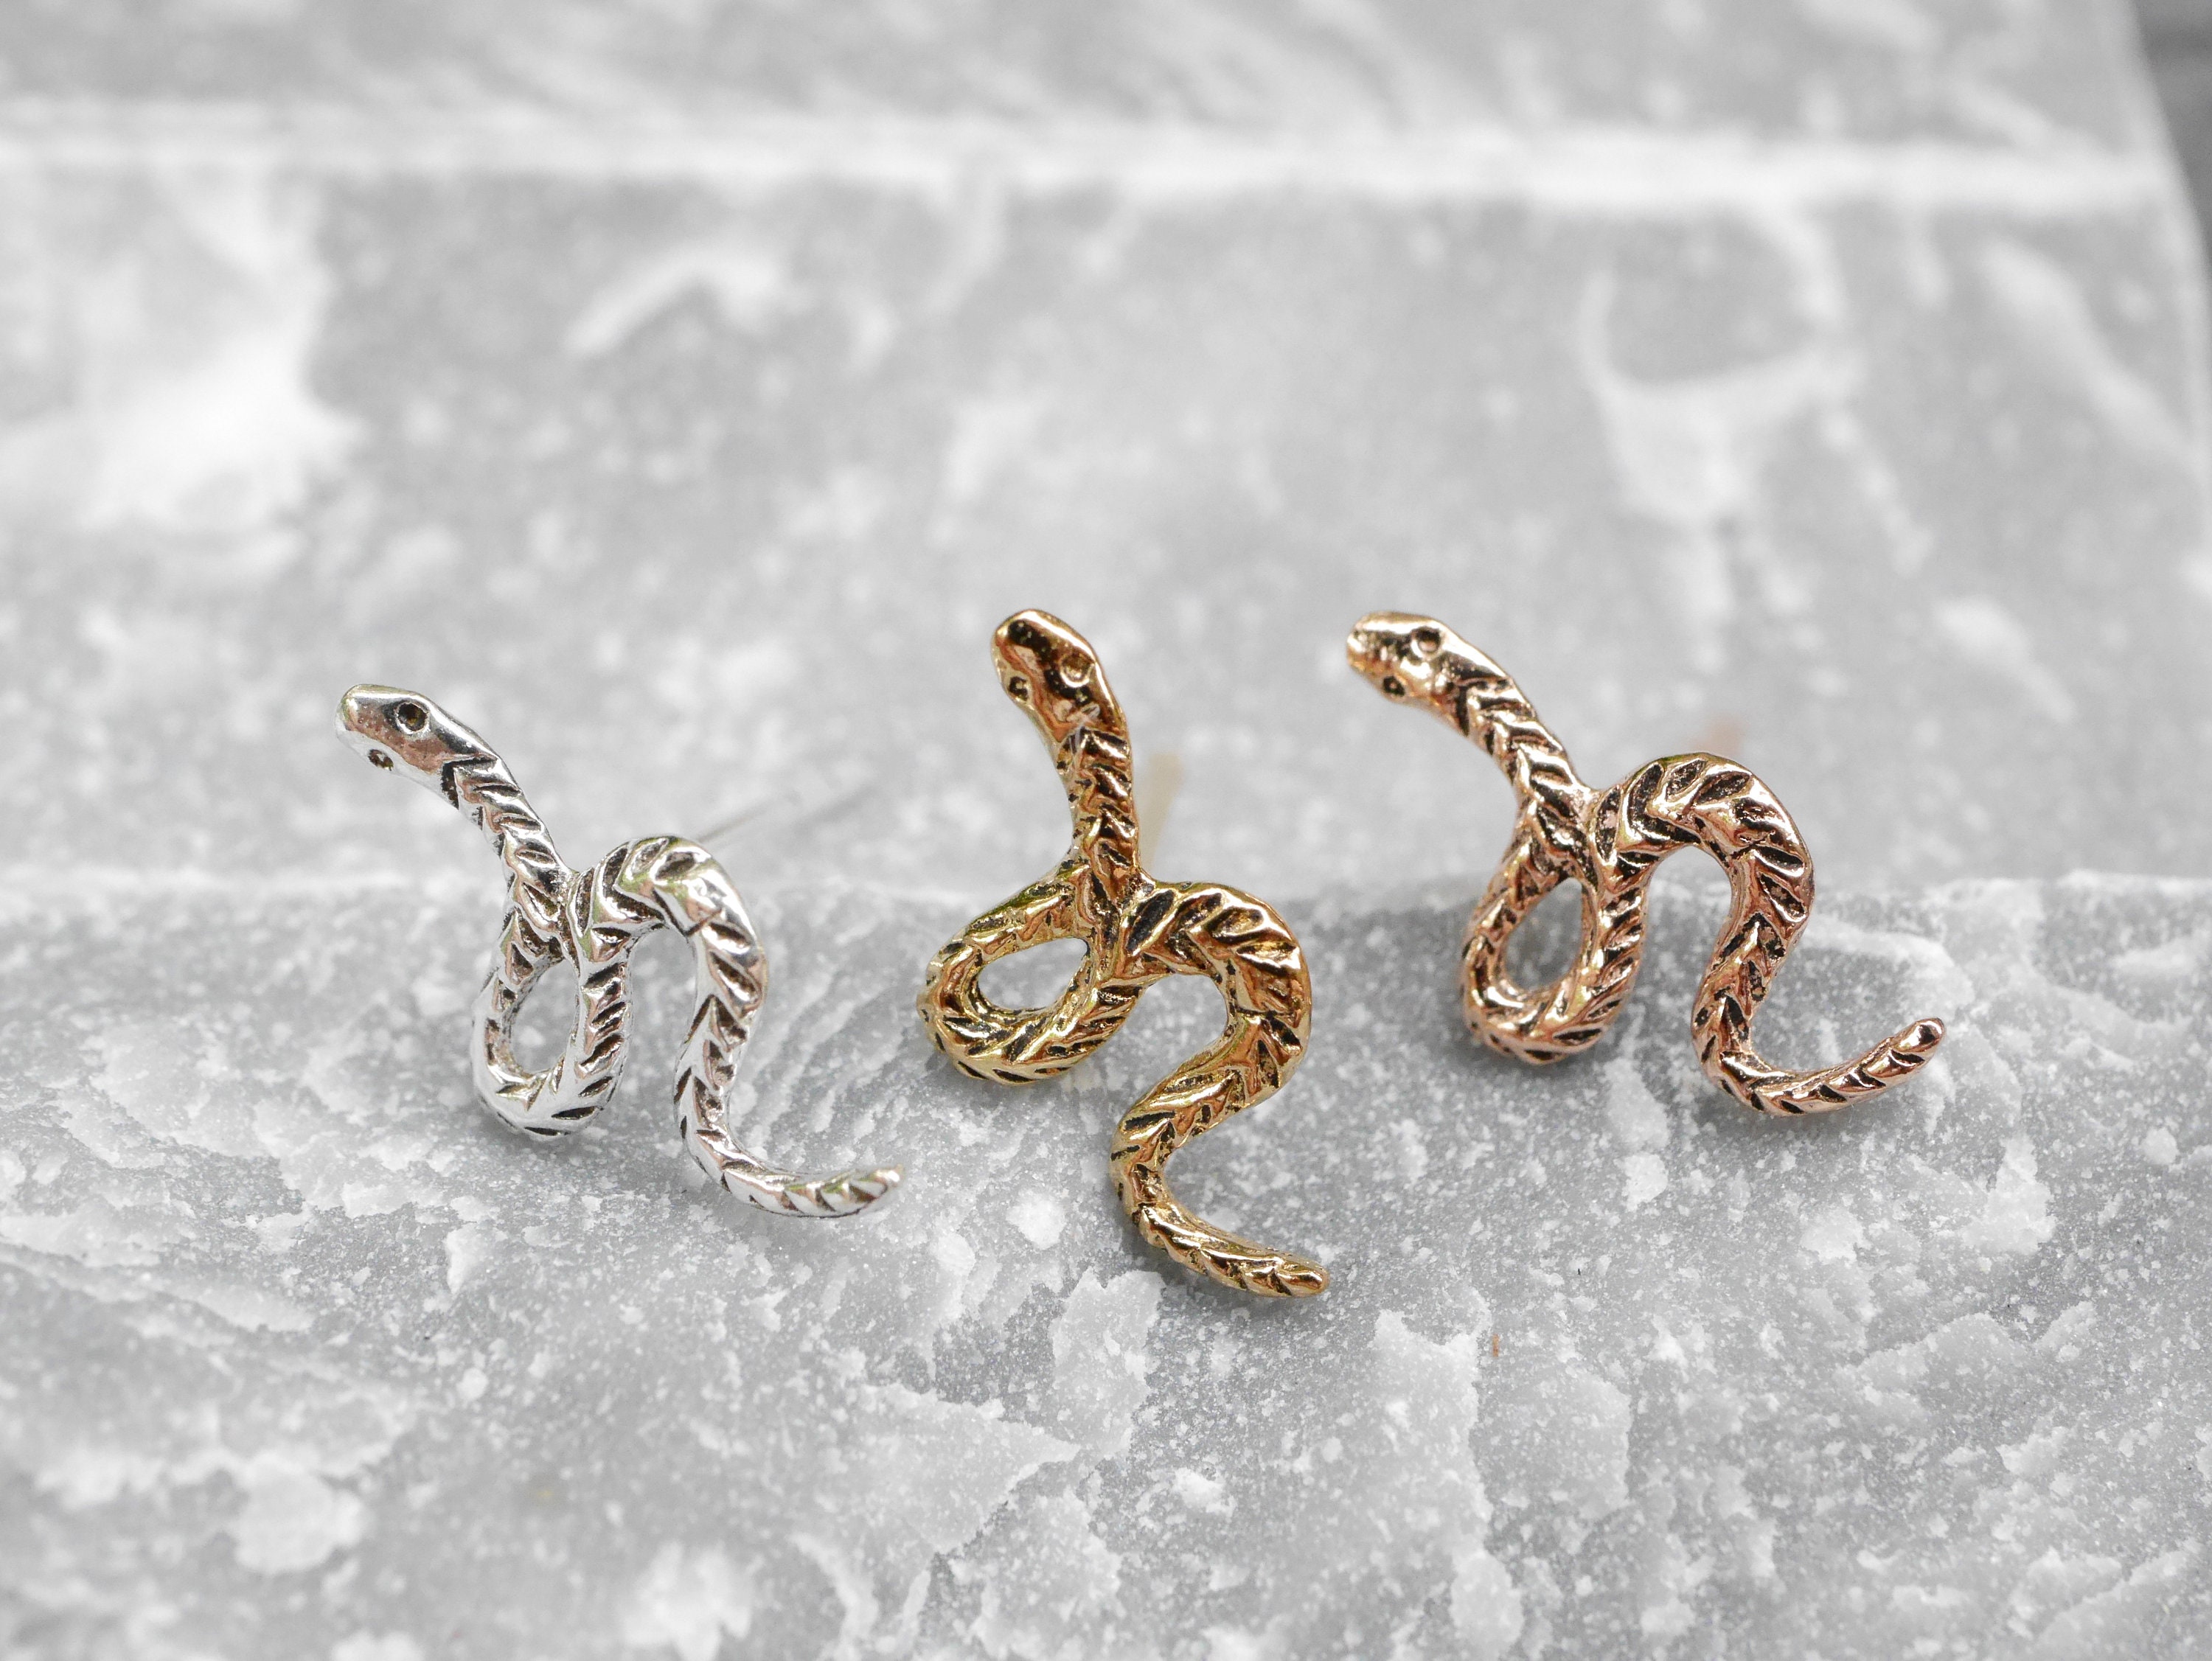  IDB Stainless Steel Small Snake Stud Earrings - Approx. 3/8  inch (0.4 / 10mm) - Super Cute Dainty Reptile Studs in Gold, Silver, Multicolor